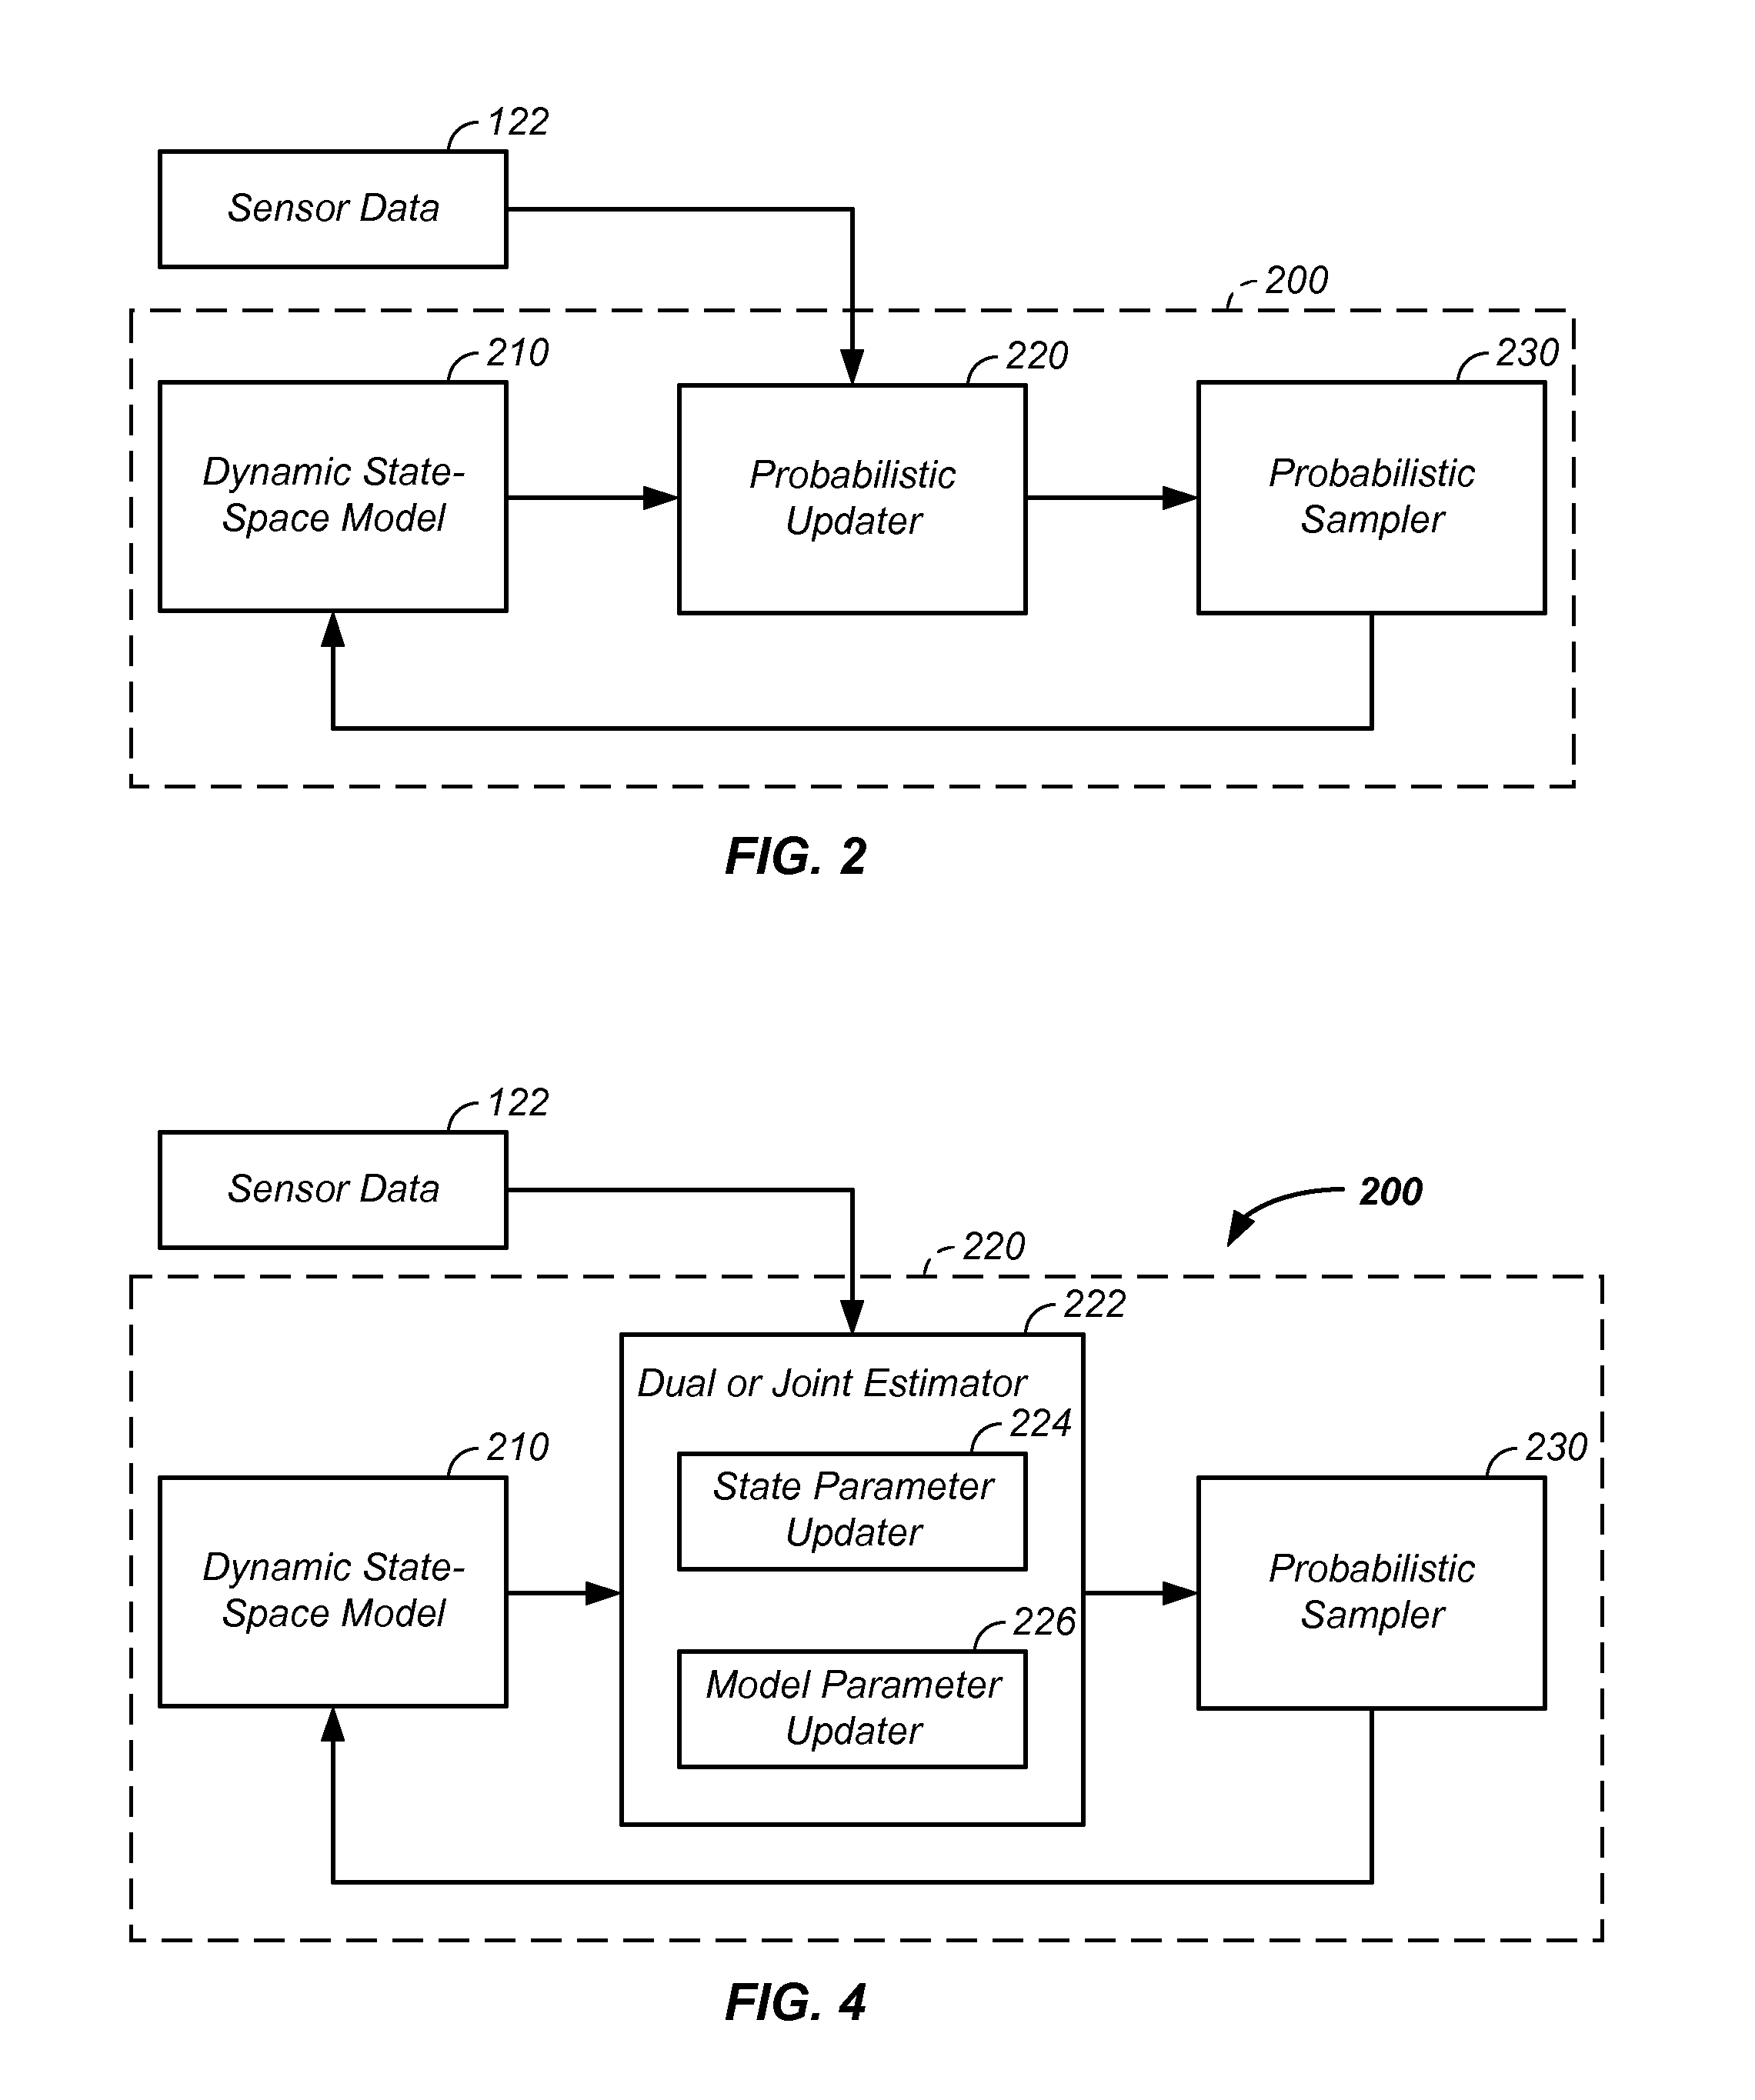 Probabilistic parameter estimation using fused data apparatus and method of use thereof